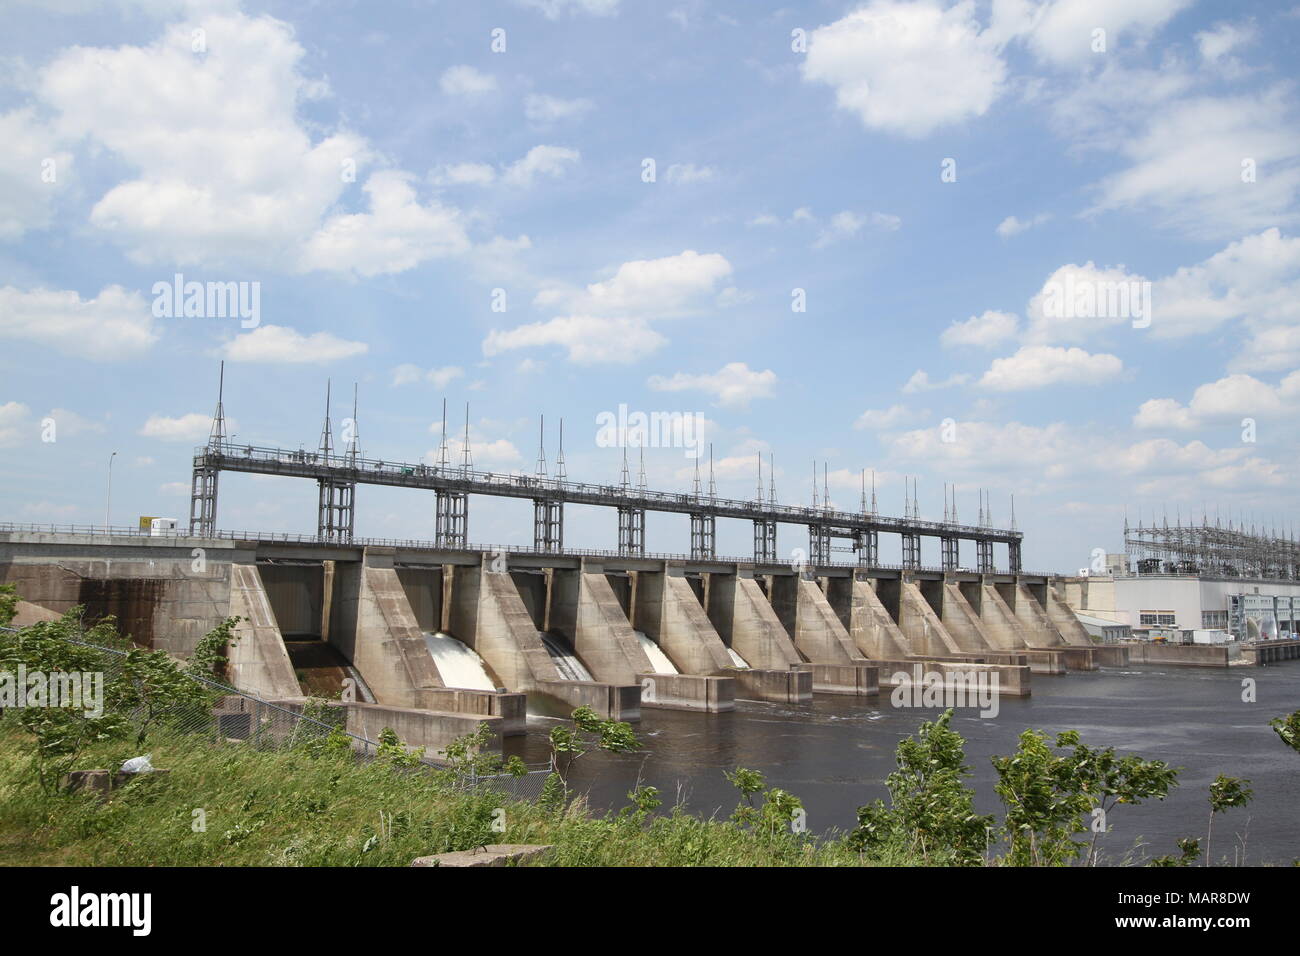 Hydroelectric power plant generates electricity Stock Photo